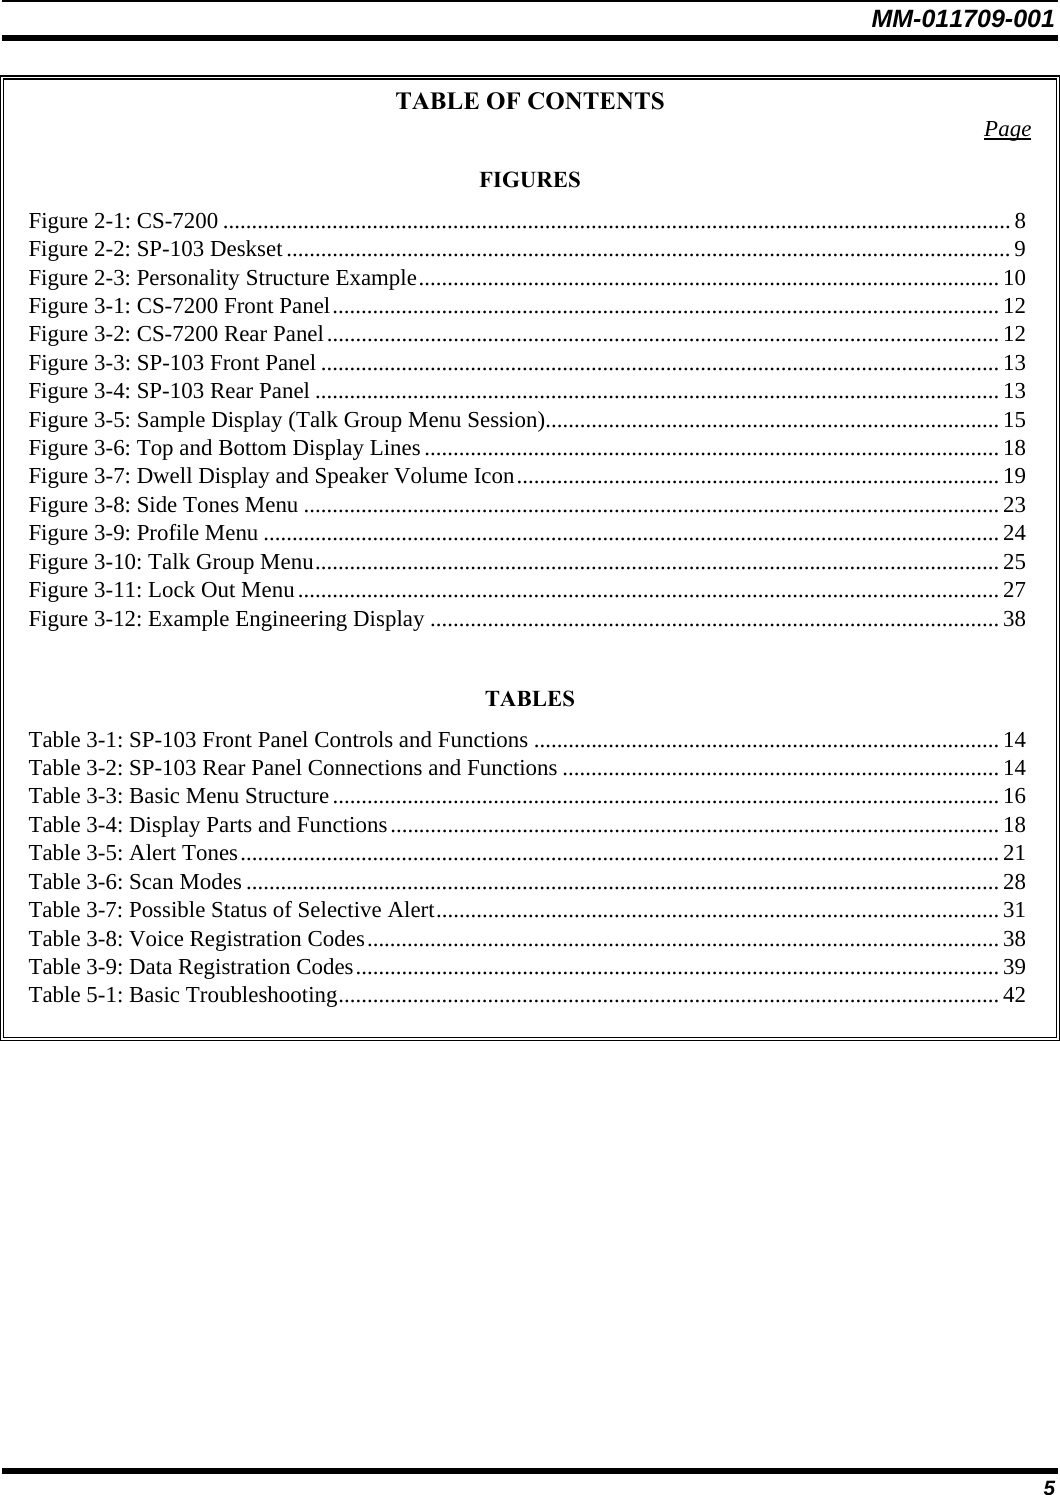 MM-011709-001 5 TABLE OF CONTENTS  Page FIGURES Figure 2-1: CS-7200 ......................................................................................................................................... 8 Figure 2-2: SP-103 Deskset.............................................................................................................................. 9 Figure 2-3: Personality Structure Example..................................................................................................... 10 Figure 3-1: CS-7200 Front Panel.................................................................................................................... 12 Figure 3-2: CS-7200 Rear Panel..................................................................................................................... 12 Figure 3-3: SP-103 Front Panel ...................................................................................................................... 13 Figure 3-4: SP-103 Rear Panel ....................................................................................................................... 13 Figure 3-5: Sample Display (Talk Group Menu Session)............................................................................... 15 Figure 3-6: Top and Bottom Display Lines.................................................................................................... 18 Figure 3-7: Dwell Display and Speaker Volume Icon.................................................................................... 19 Figure 3-8: Side Tones Menu ......................................................................................................................... 23 Figure 3-9: Profile Menu ................................................................................................................................ 24 Figure 3-10: Talk Group Menu....................................................................................................................... 25 Figure 3-11: Lock Out Menu.......................................................................................................................... 27 Figure 3-12: Example Engineering Display ................................................................................................... 38  TABLES Table 3-1: SP-103 Front Panel Controls and Functions ................................................................................. 14 Table 3-2: SP-103 Rear Panel Connections and Functions ............................................................................ 14 Table 3-3: Basic Menu Structure.................................................................................................................... 16 Table 3-4: Display Parts and Functions.......................................................................................................... 18 Table 3-5: Alert Tones.................................................................................................................................... 21 Table 3-6: Scan Modes ................................................................................................................................... 28 Table 3-7: Possible Status of Selective Alert.................................................................................................. 31 Table 3-8: Voice Registration Codes.............................................................................................................. 38 Table 3-9: Data Registration Codes................................................................................................................ 39 Table 5-1: Basic Troubleshooting................................................................................................................... 42  